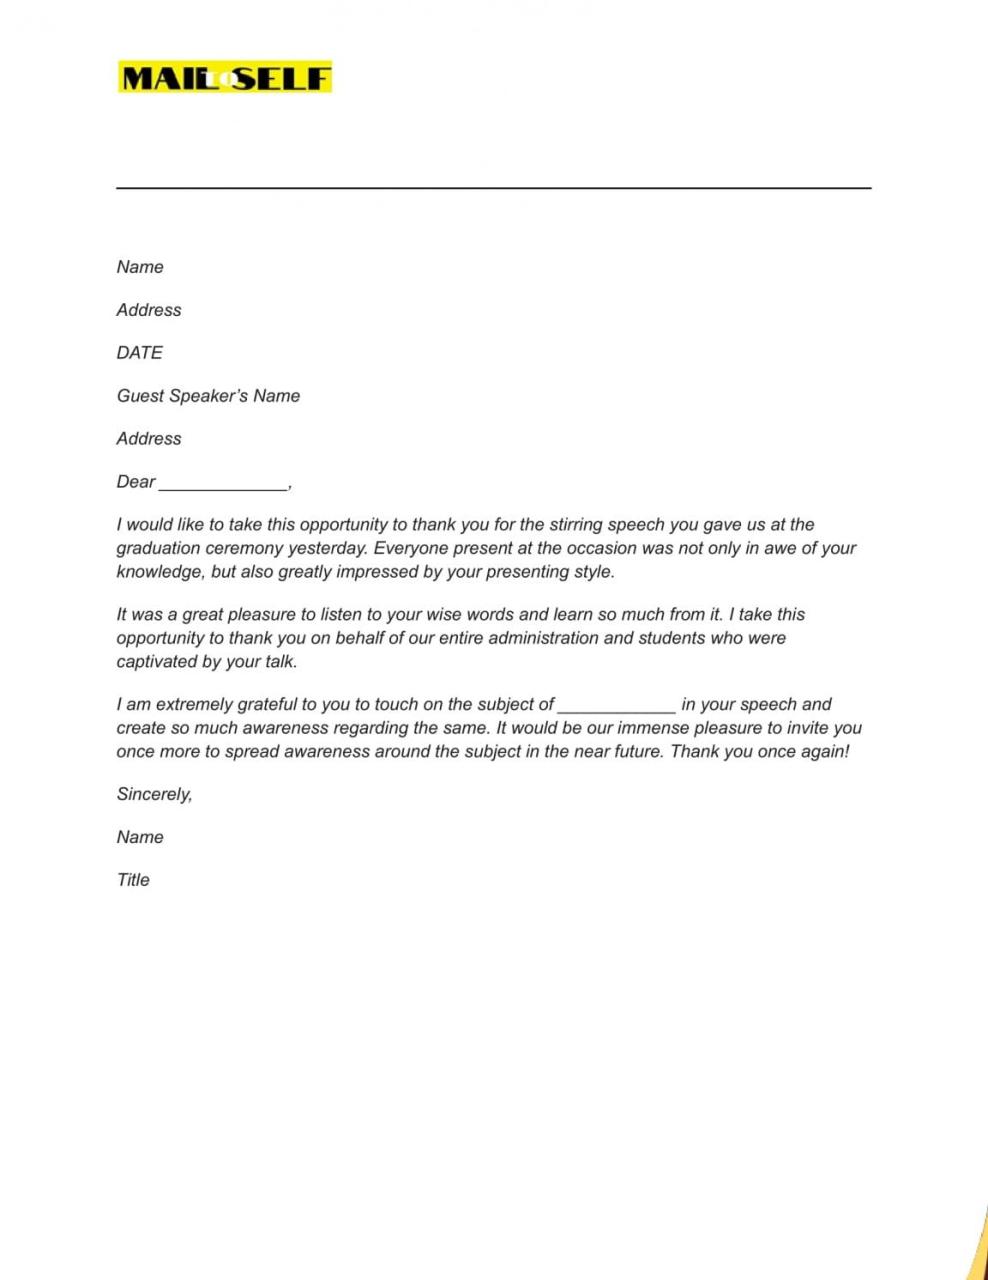 Thank You Letter To Guest Speaker How To, Templates & Examples Mail To Self